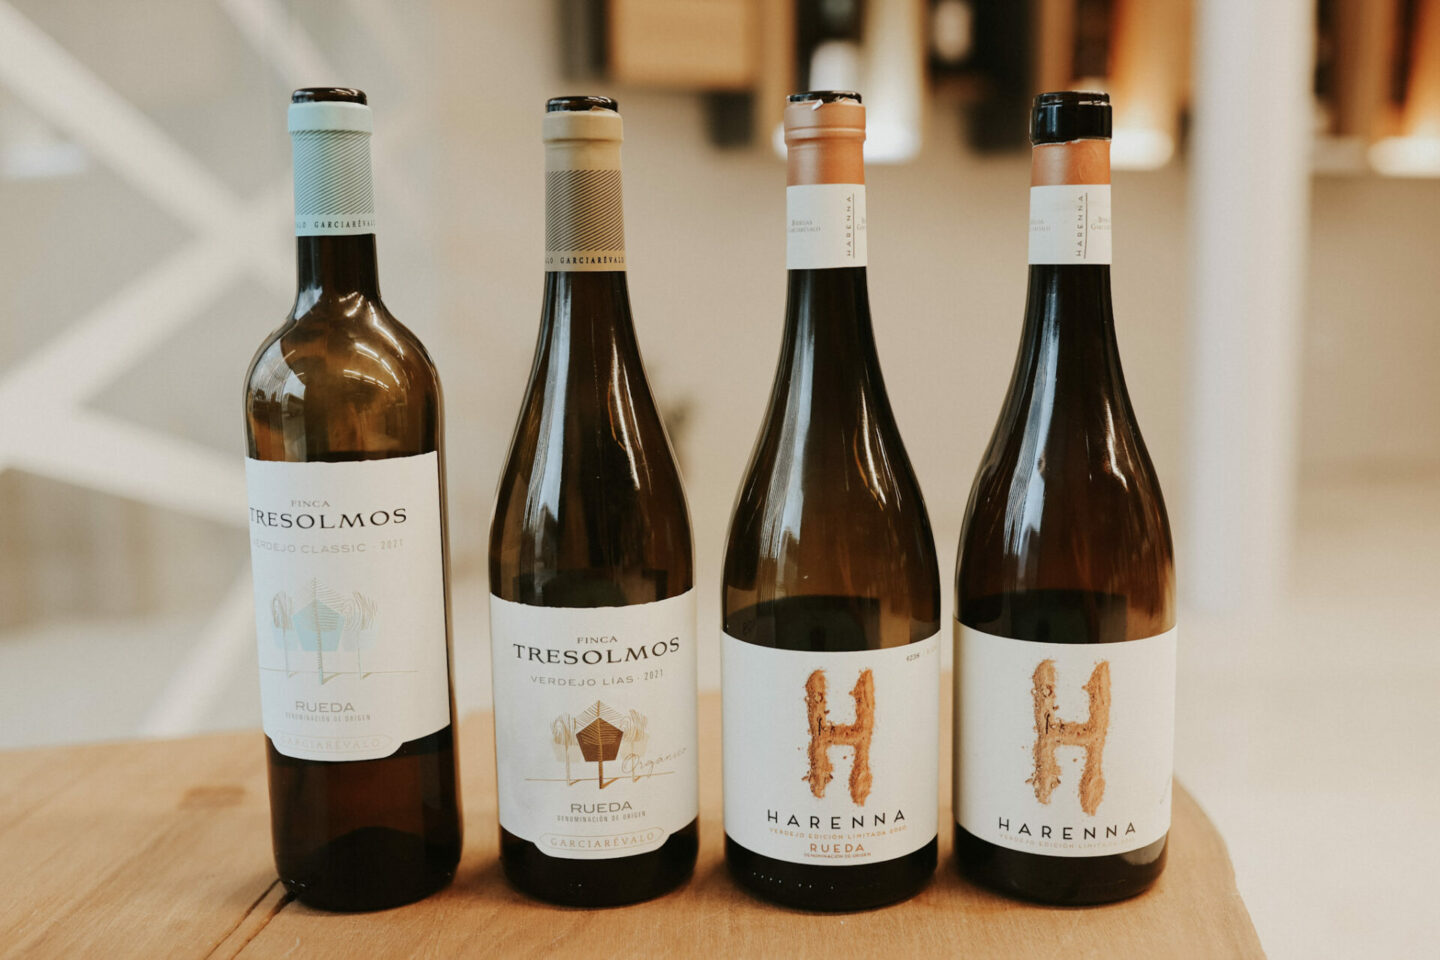 A lineup of white wines from Spain